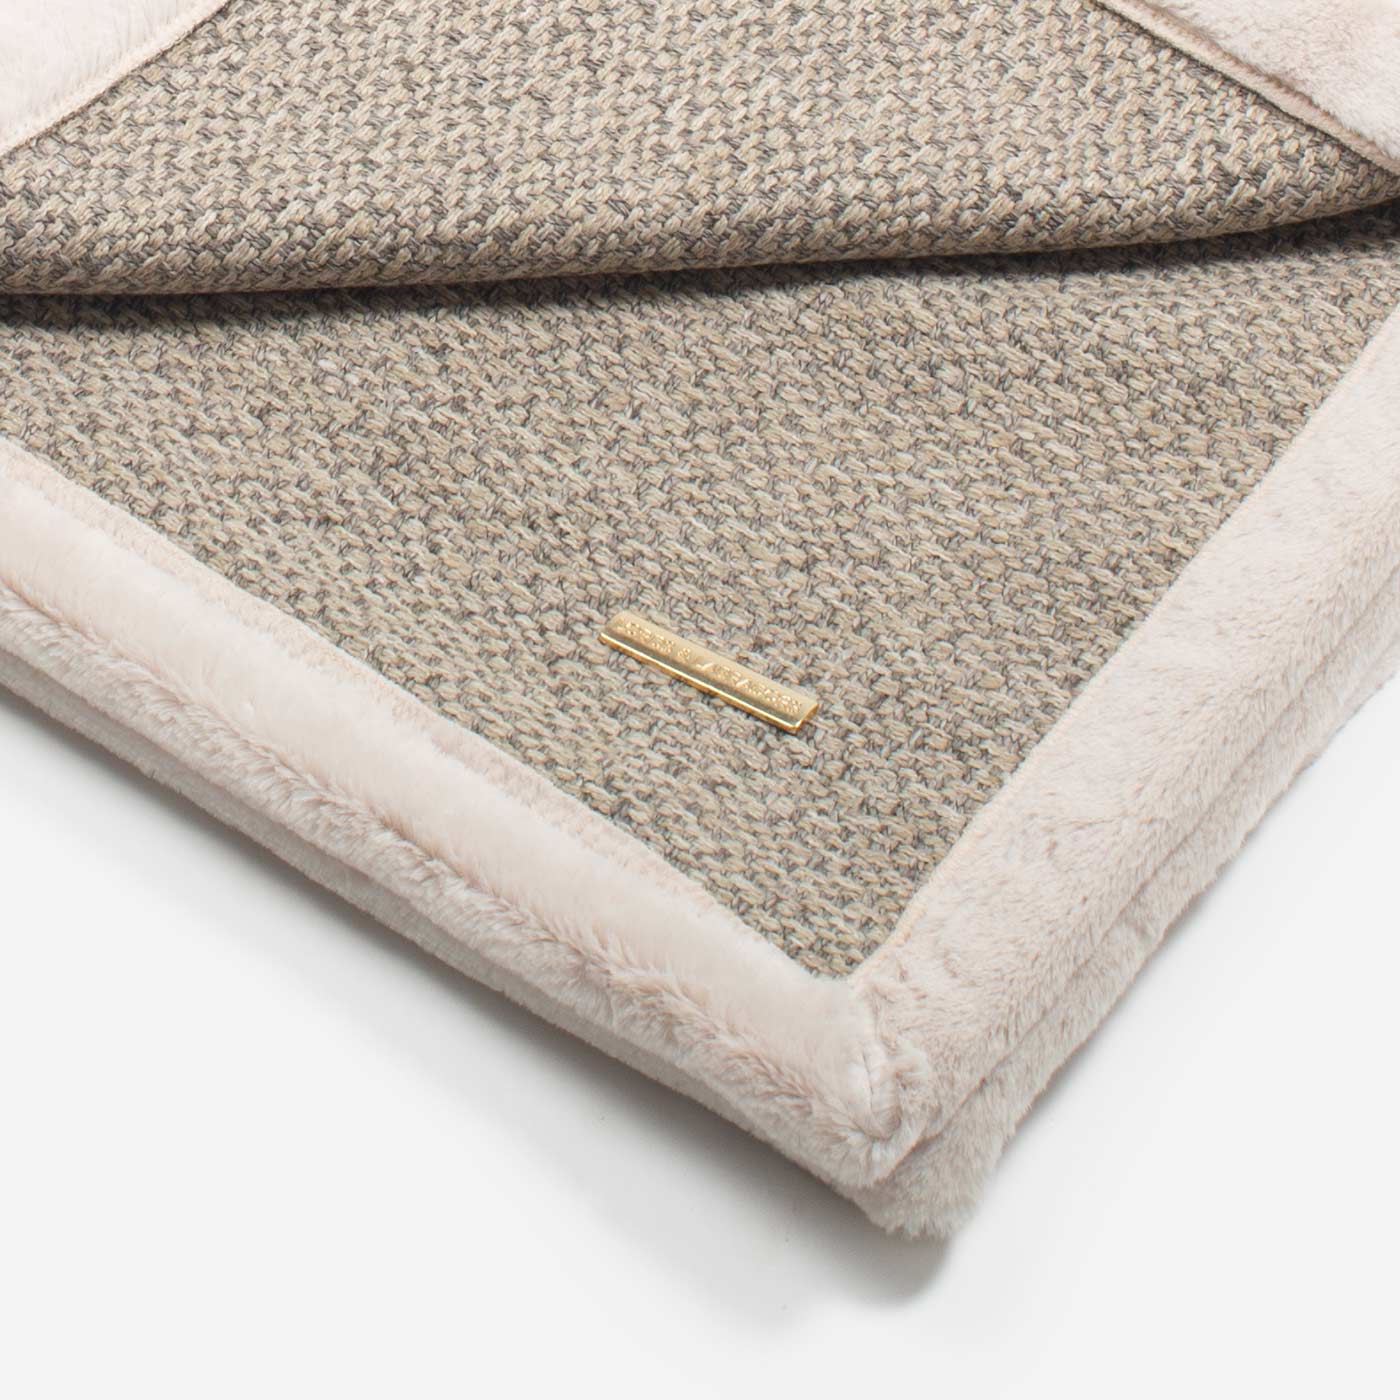 Present your furry friend with our luxuriously thick, plush blanket for your pet. Featuring a reverse side with hardwearing woven fabric handmade in Italy for the perfect high-quality pet blanket! Essentials Herdwick Blanket In Pebble, Available now at Lords & Labradors    